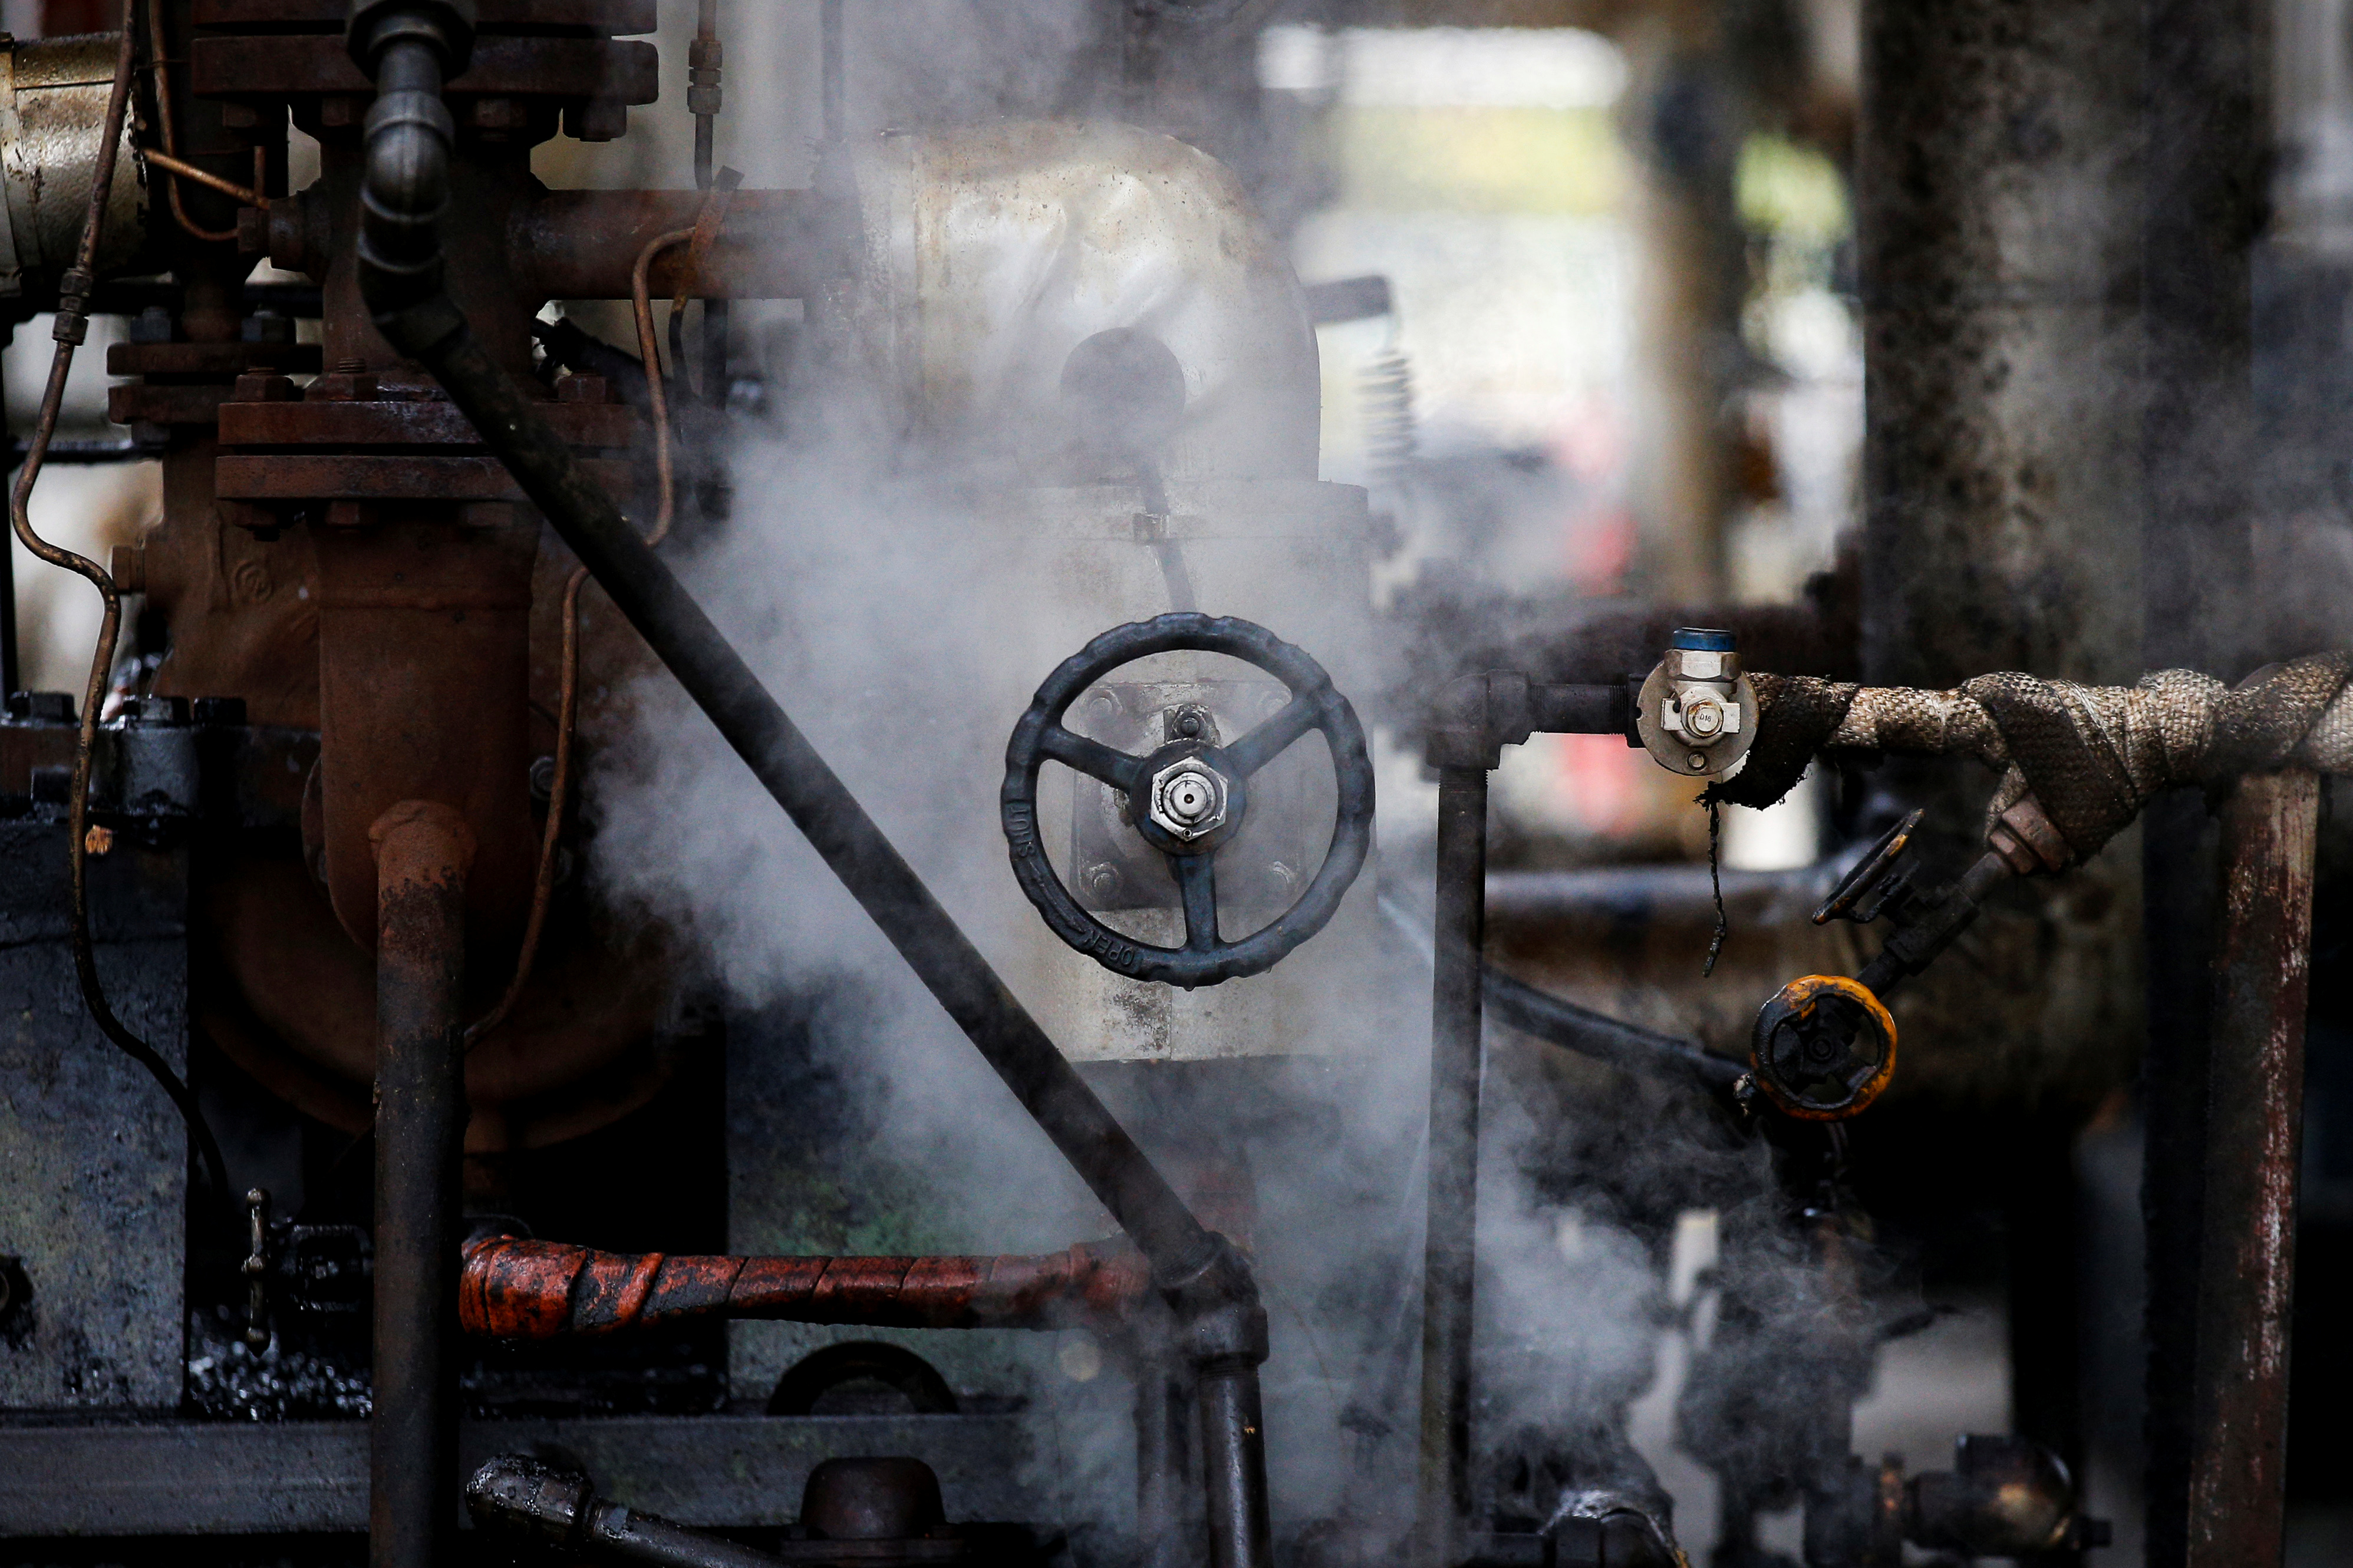 Steam rises from a valve at the American Refining Group, Inc. (ARG), the oldest continuously operated refinery in the United States founded in 1881, in Bradford, Pennsylvania